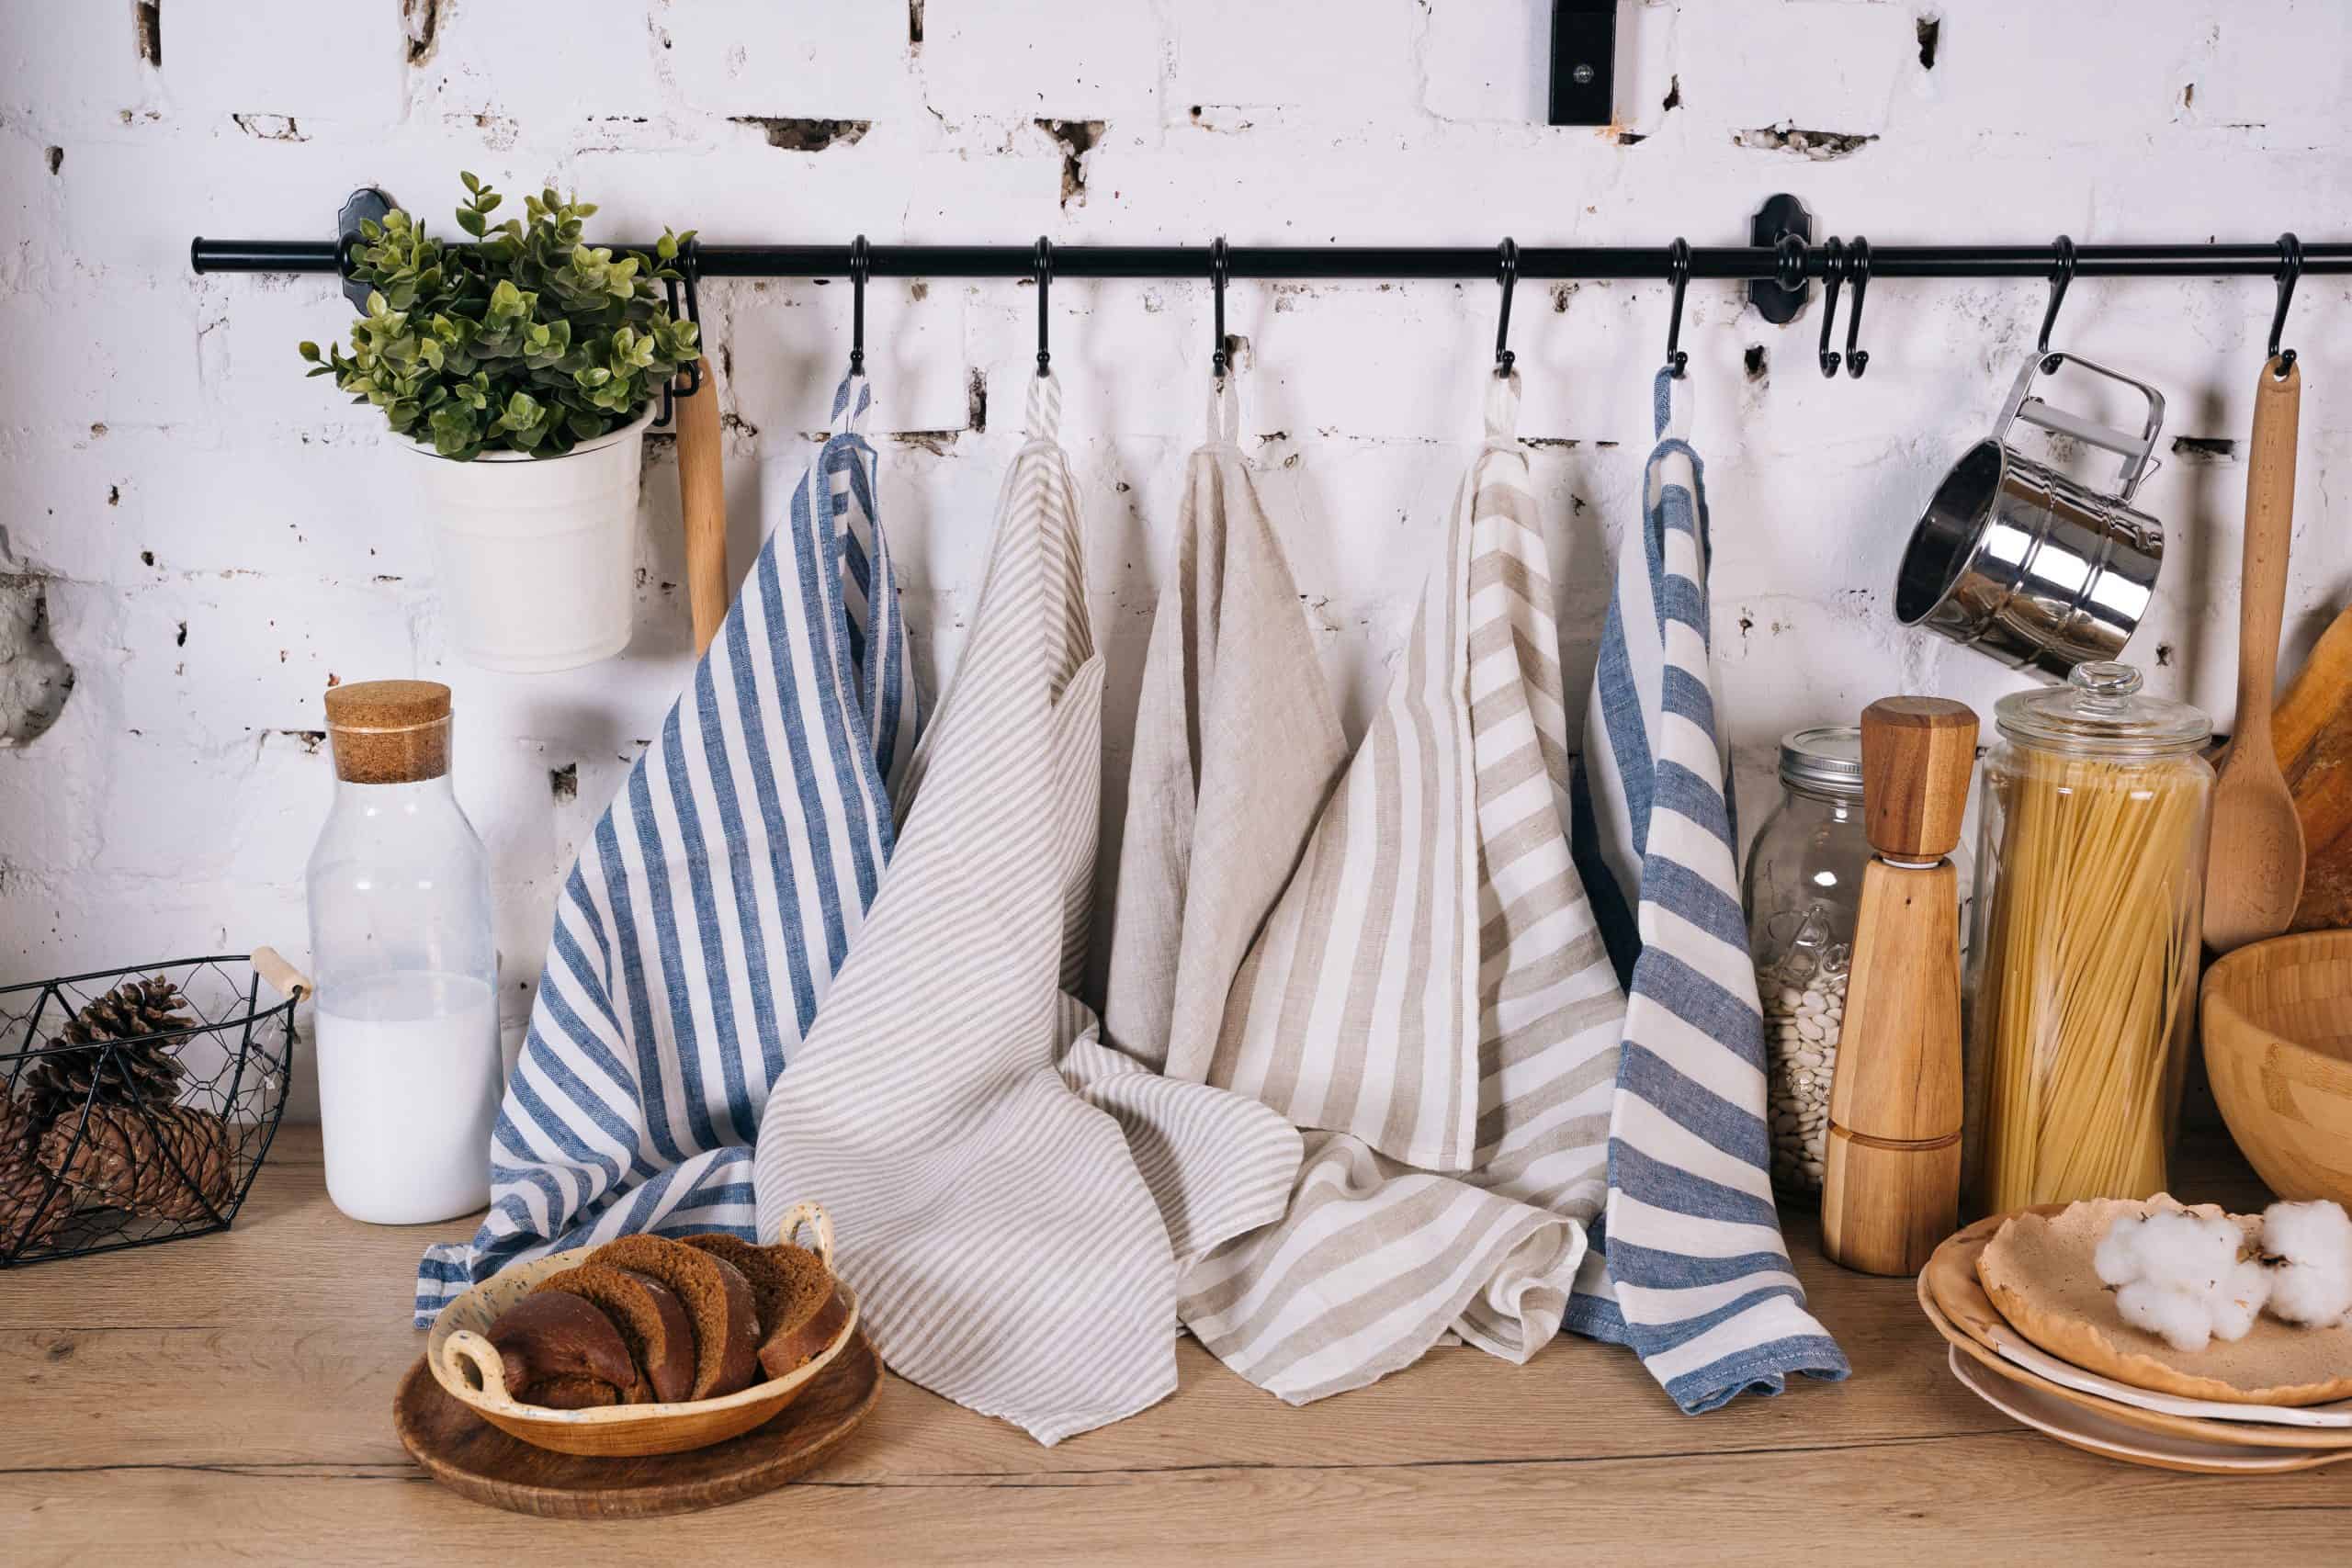 The History Of The Tea Towel And How To Make Your Own like Van